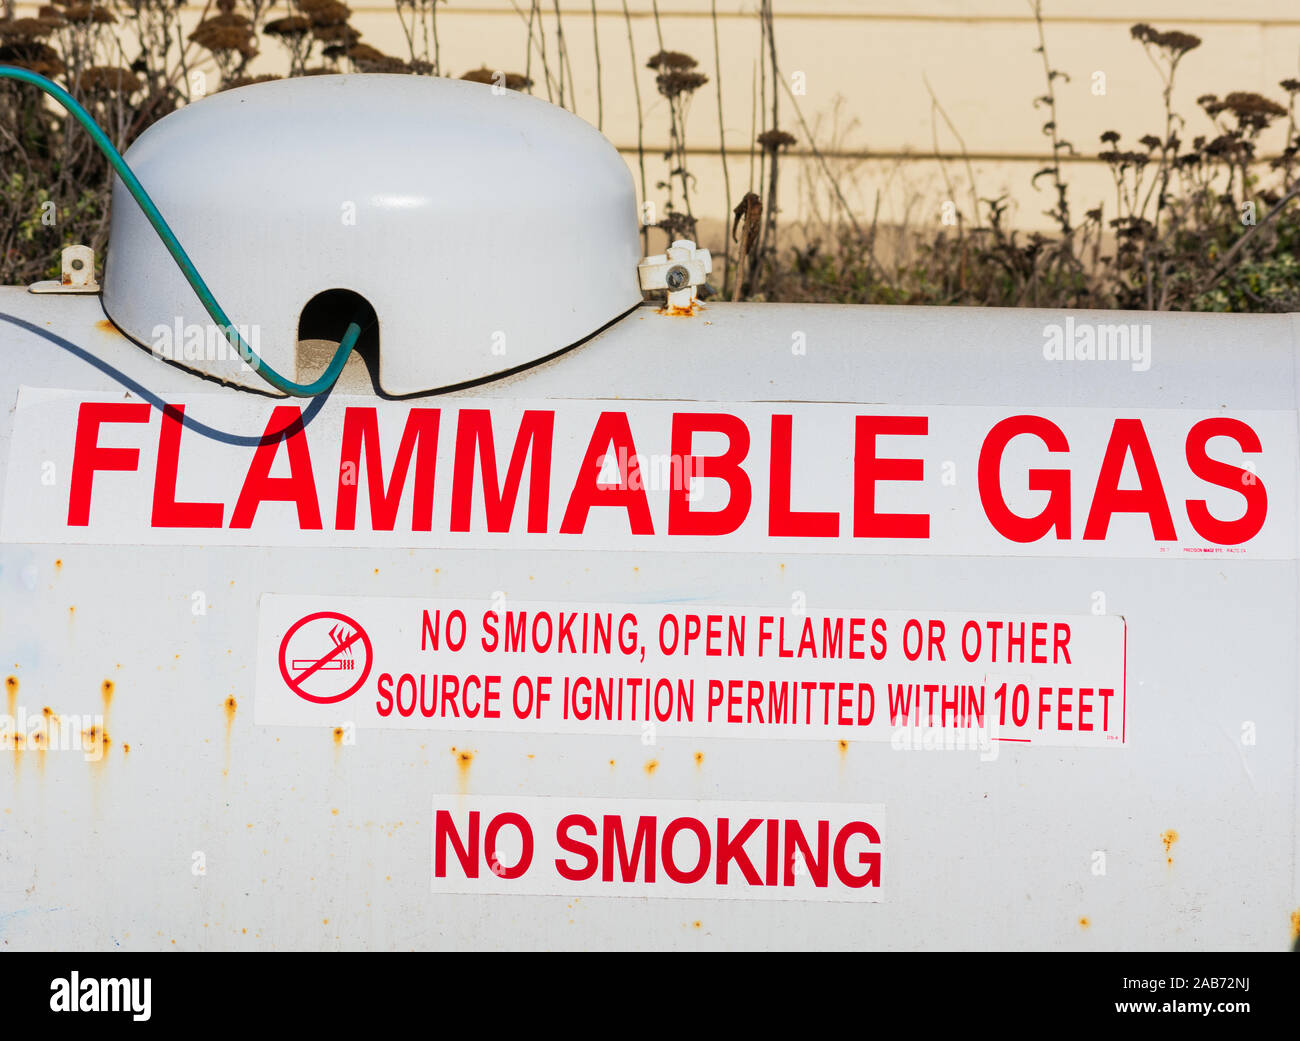 Flammable gas warning on above ground large propane tank. Rust or corrosion on the white propane tank surface. Stock Photo